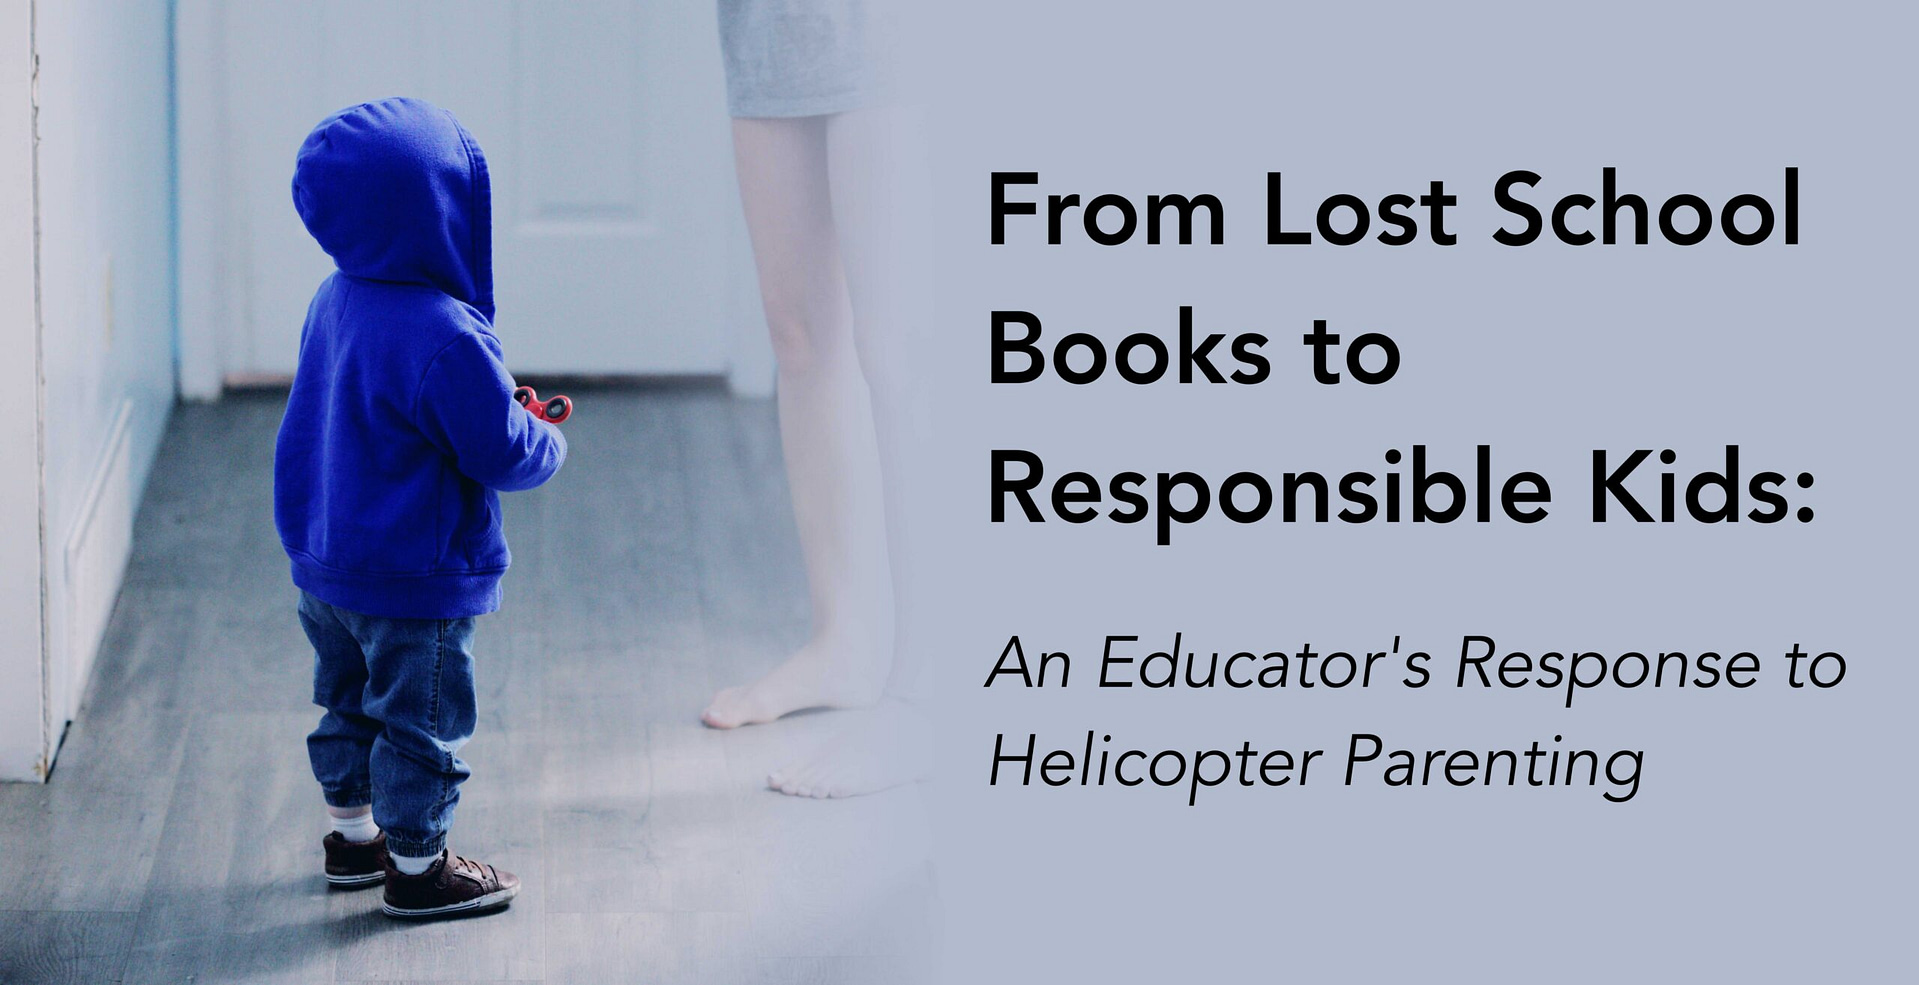 From Lost School Books to Responsible Kids: An Educator’s Response to Helicopter Parenting